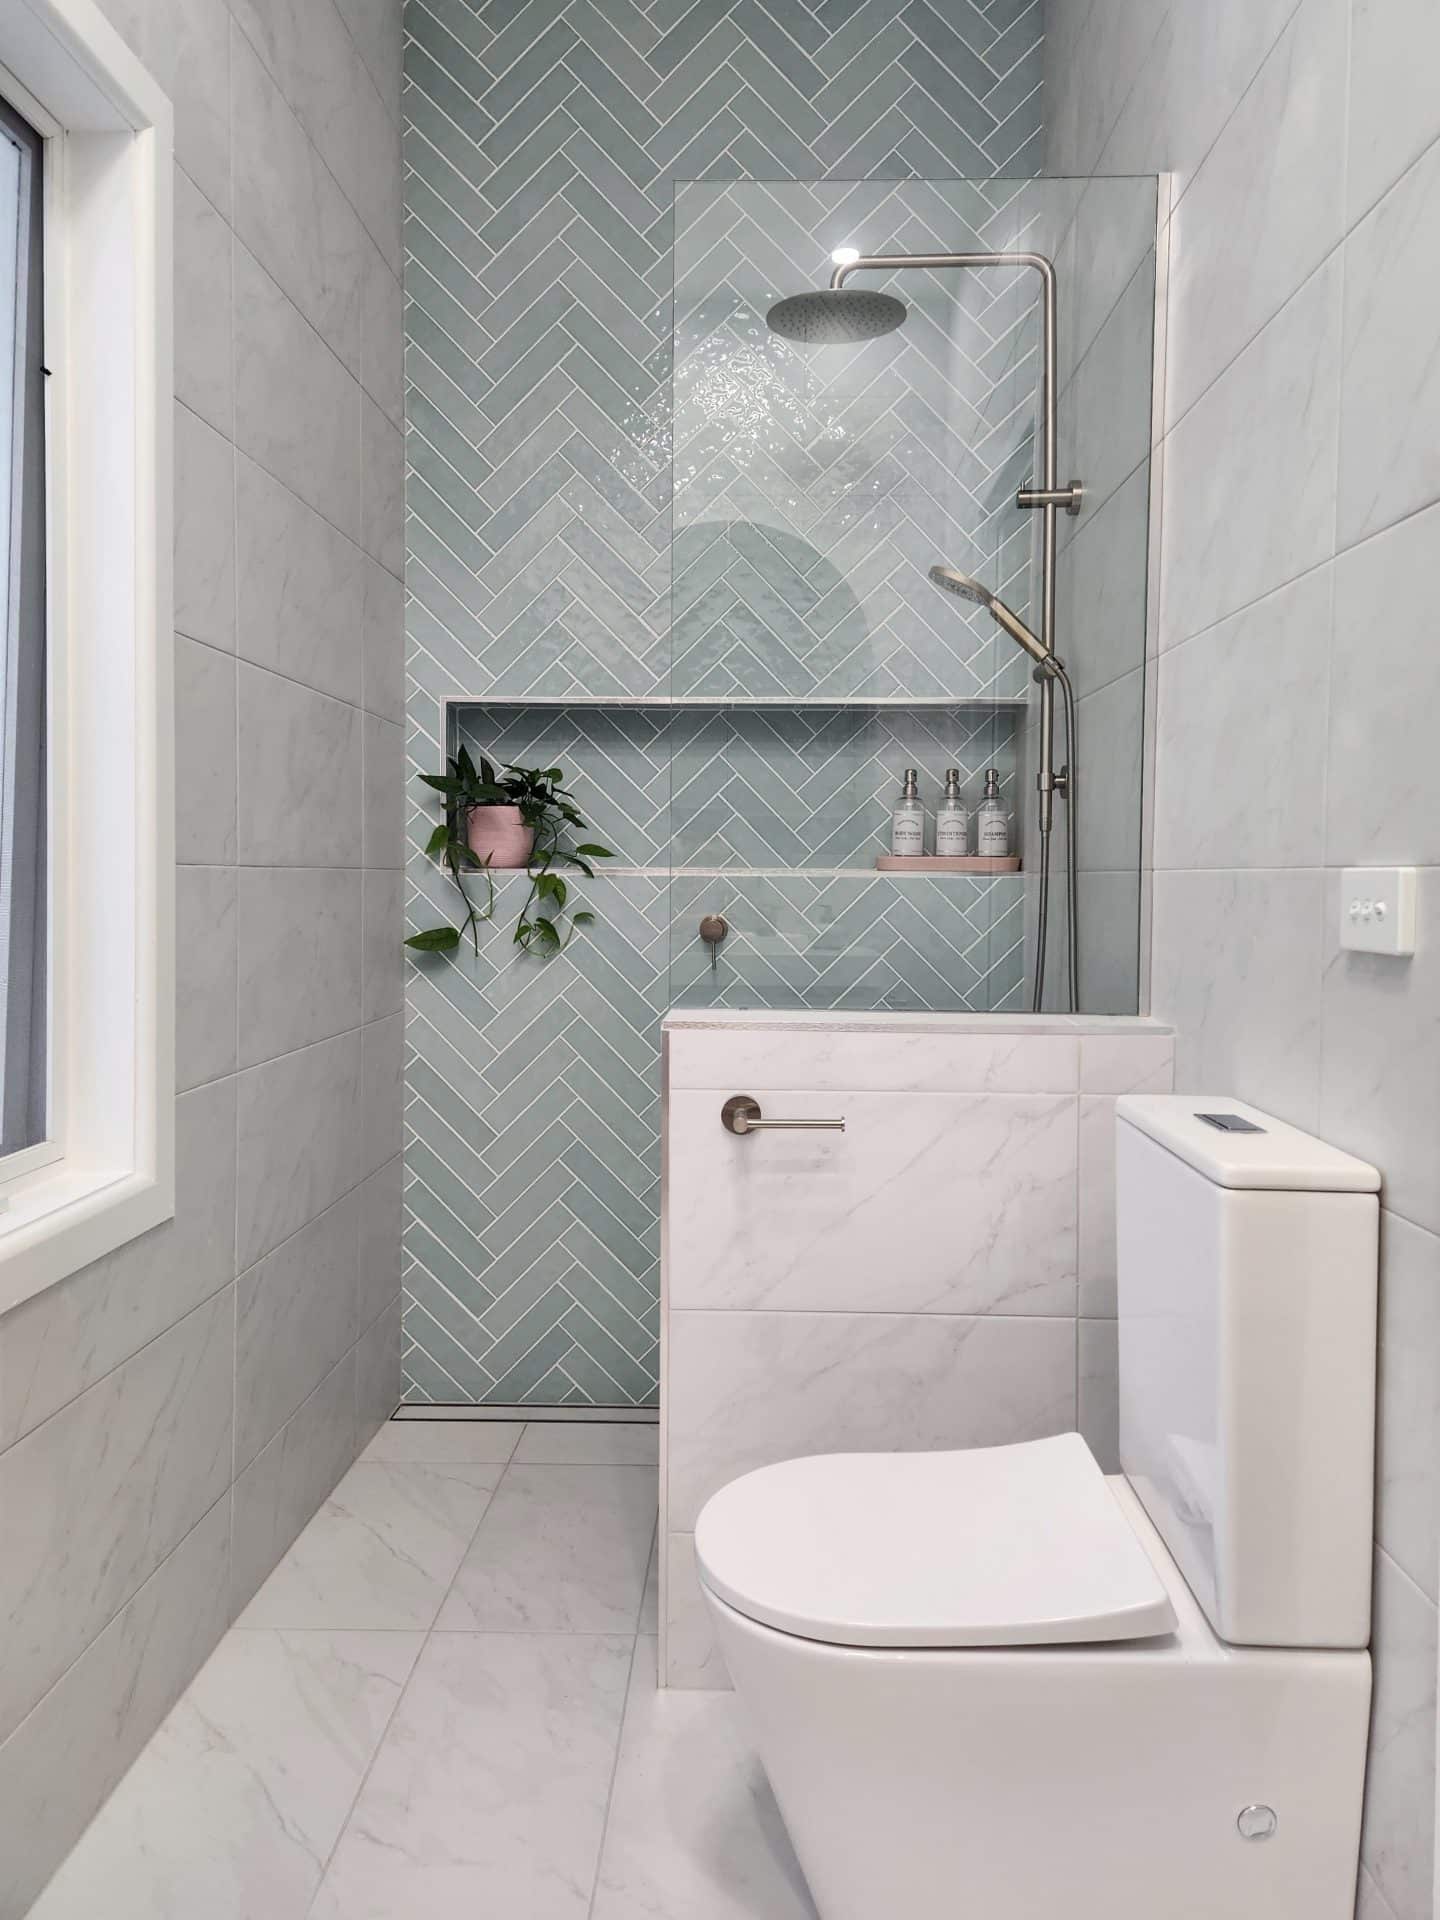 a small bathroom with tiled walls and a toilet.